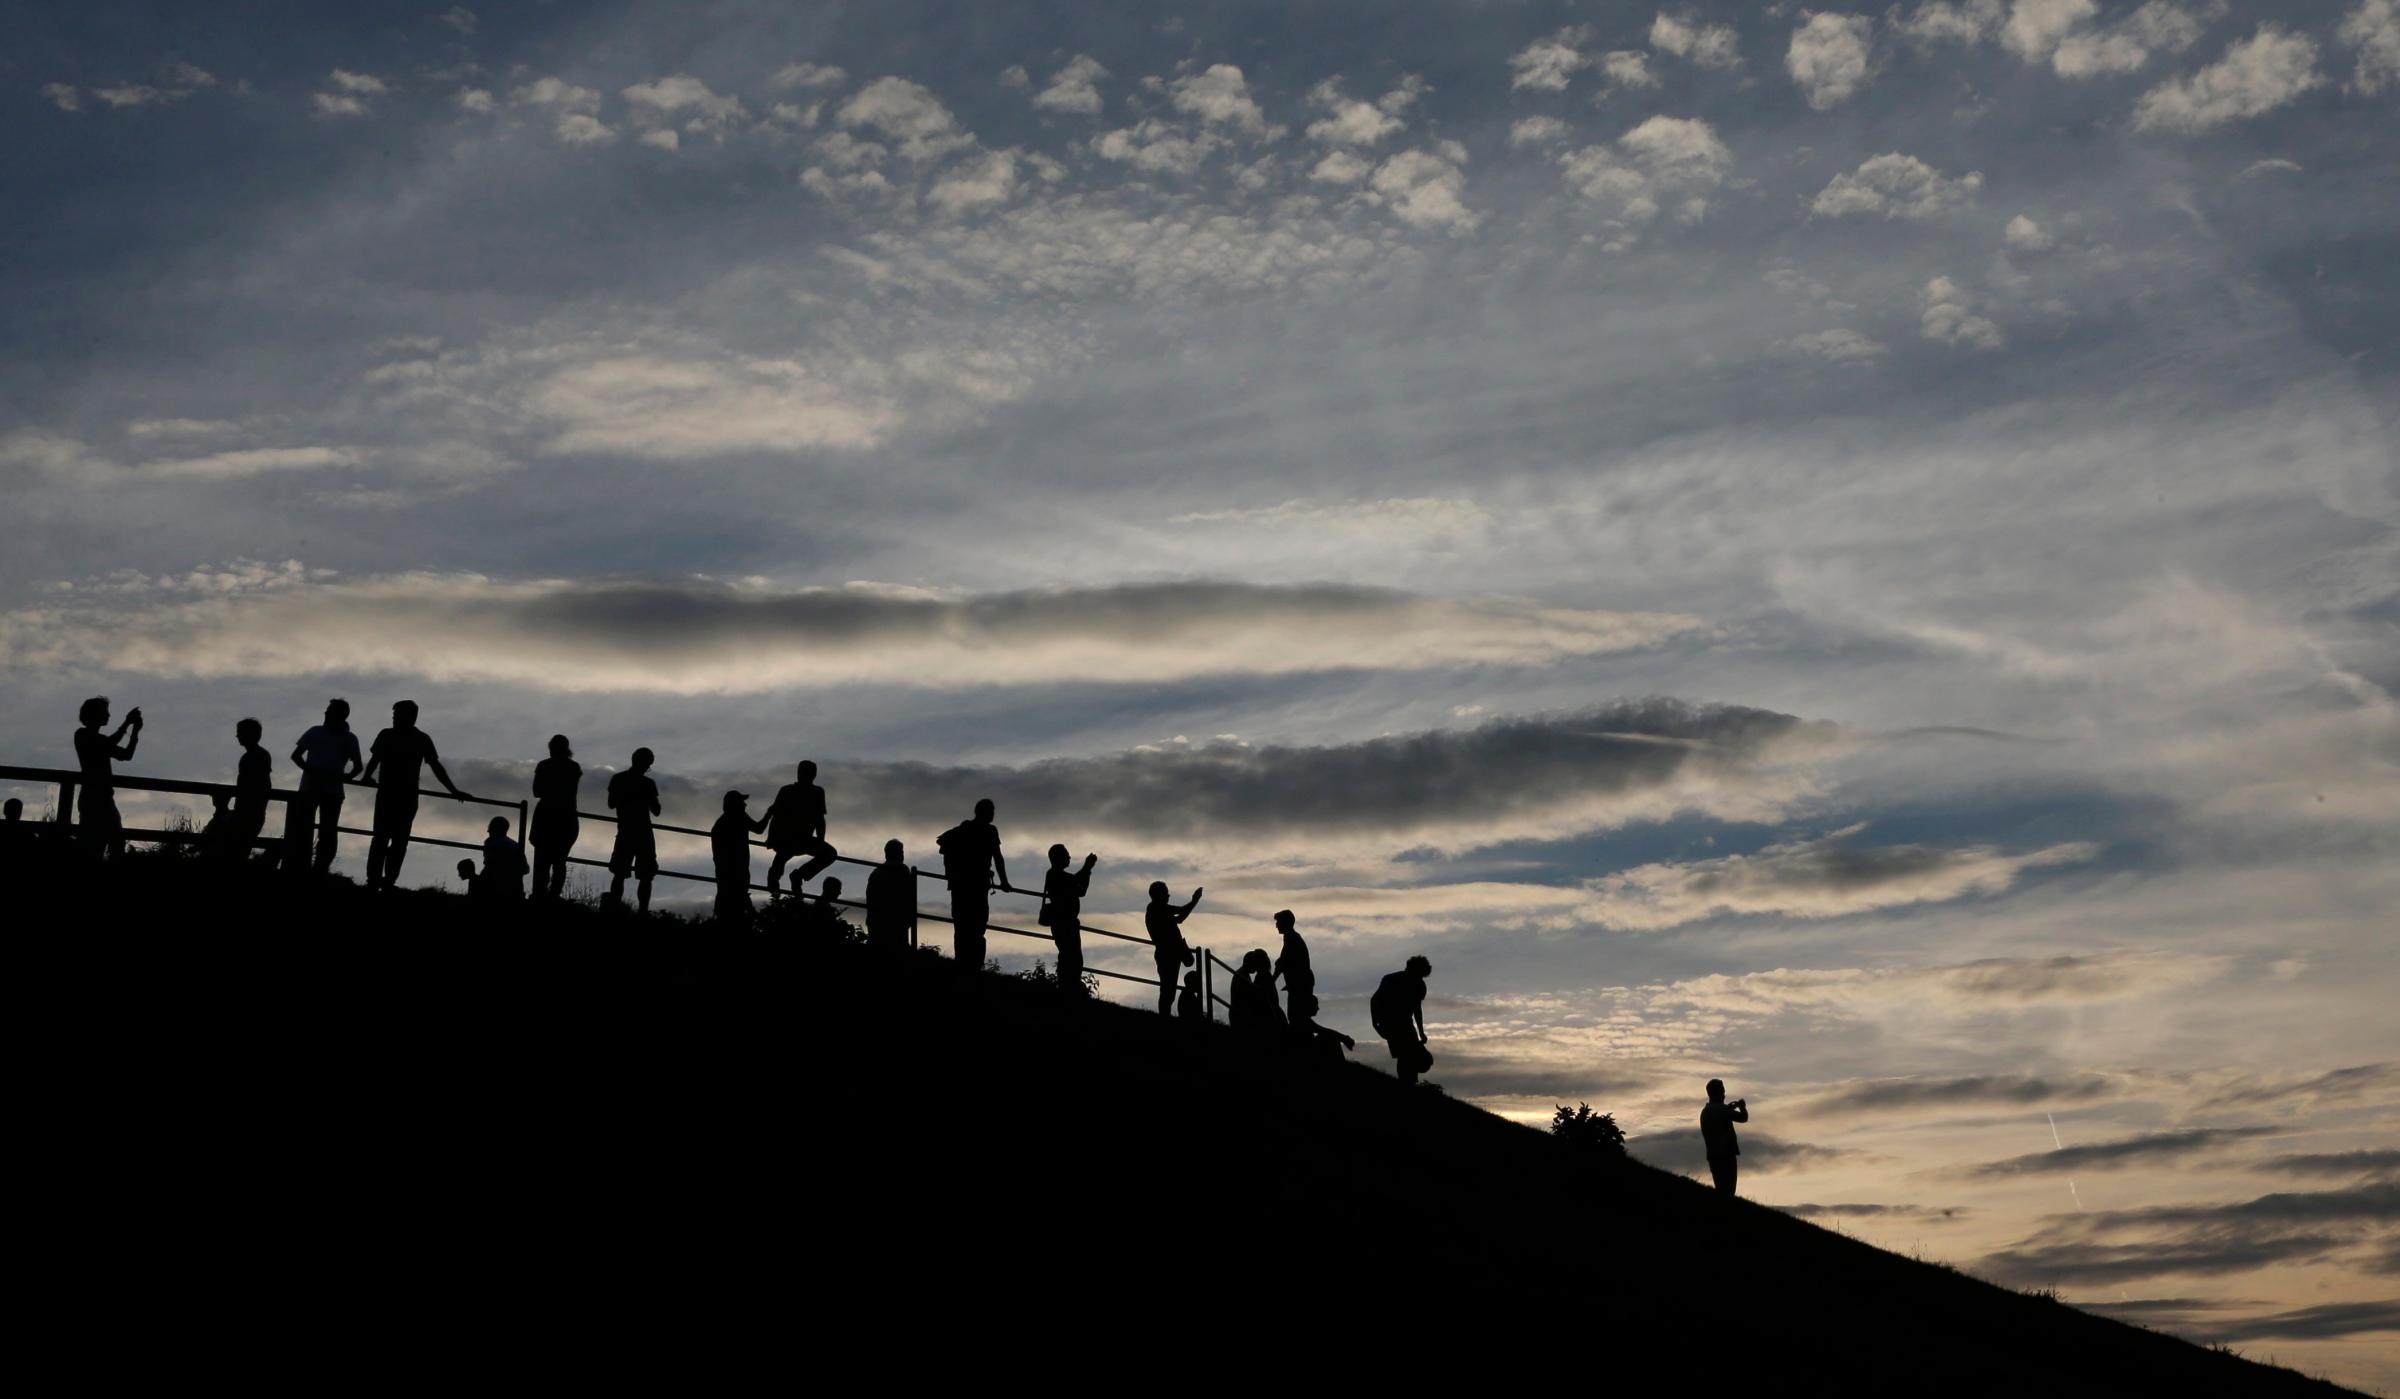 People wait for the upcoming Super Moon in the Olympic Park in Munich, Germany on August 10, 2014.